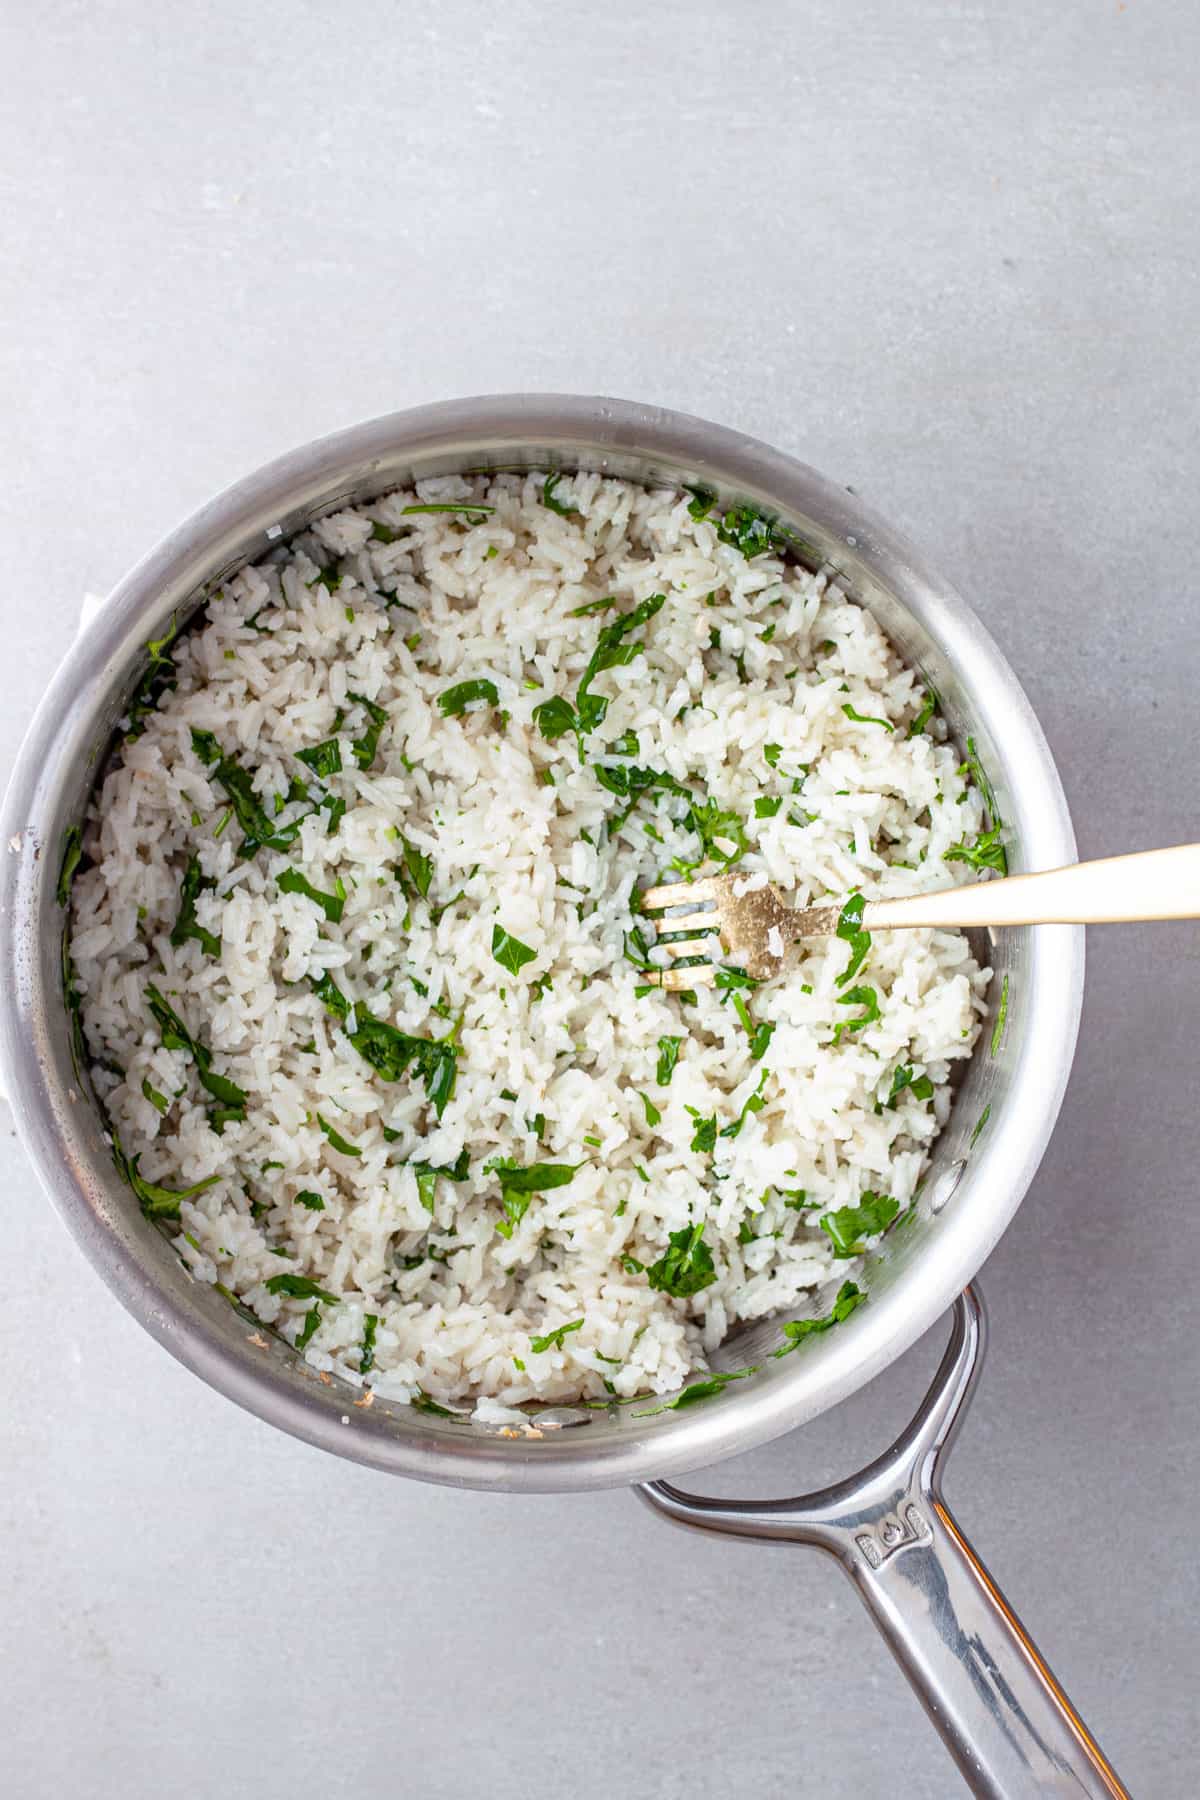 Chopped cilantro fluffed into cooked coconut rice.